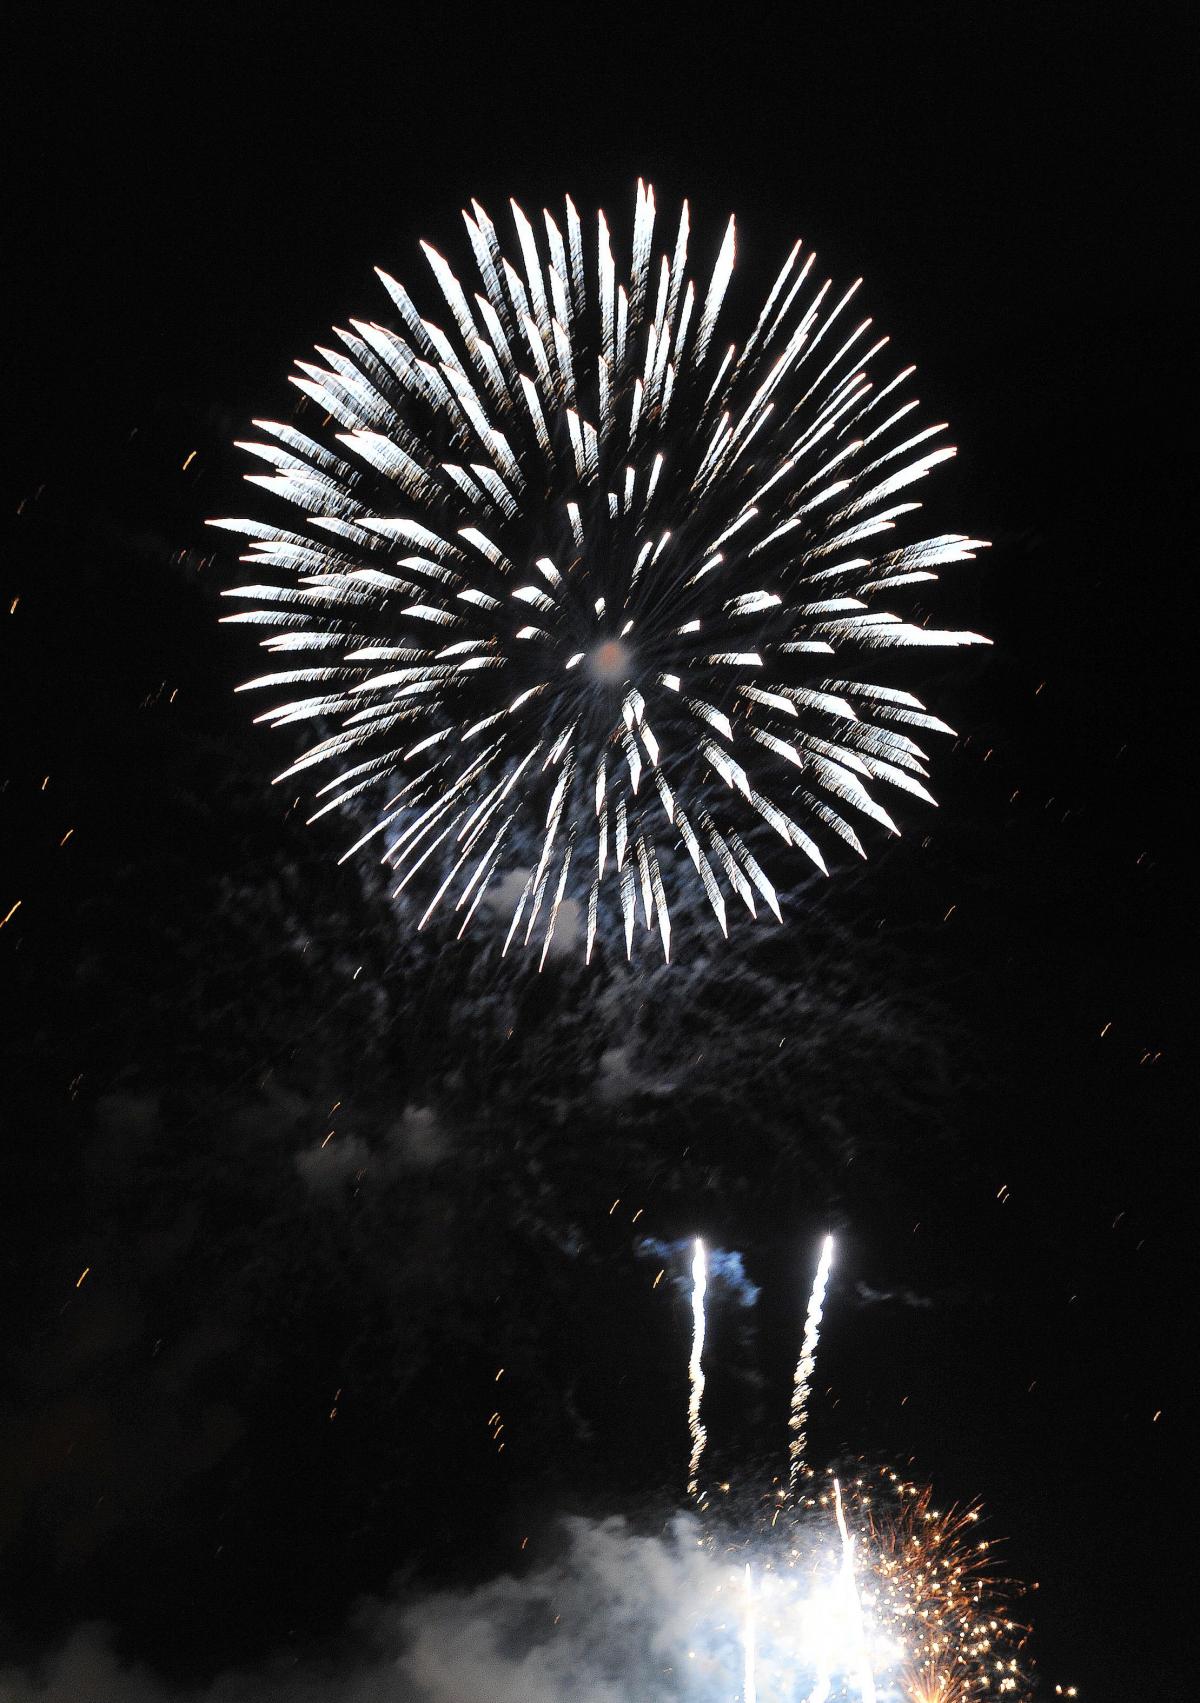 The fireworks display at South Park